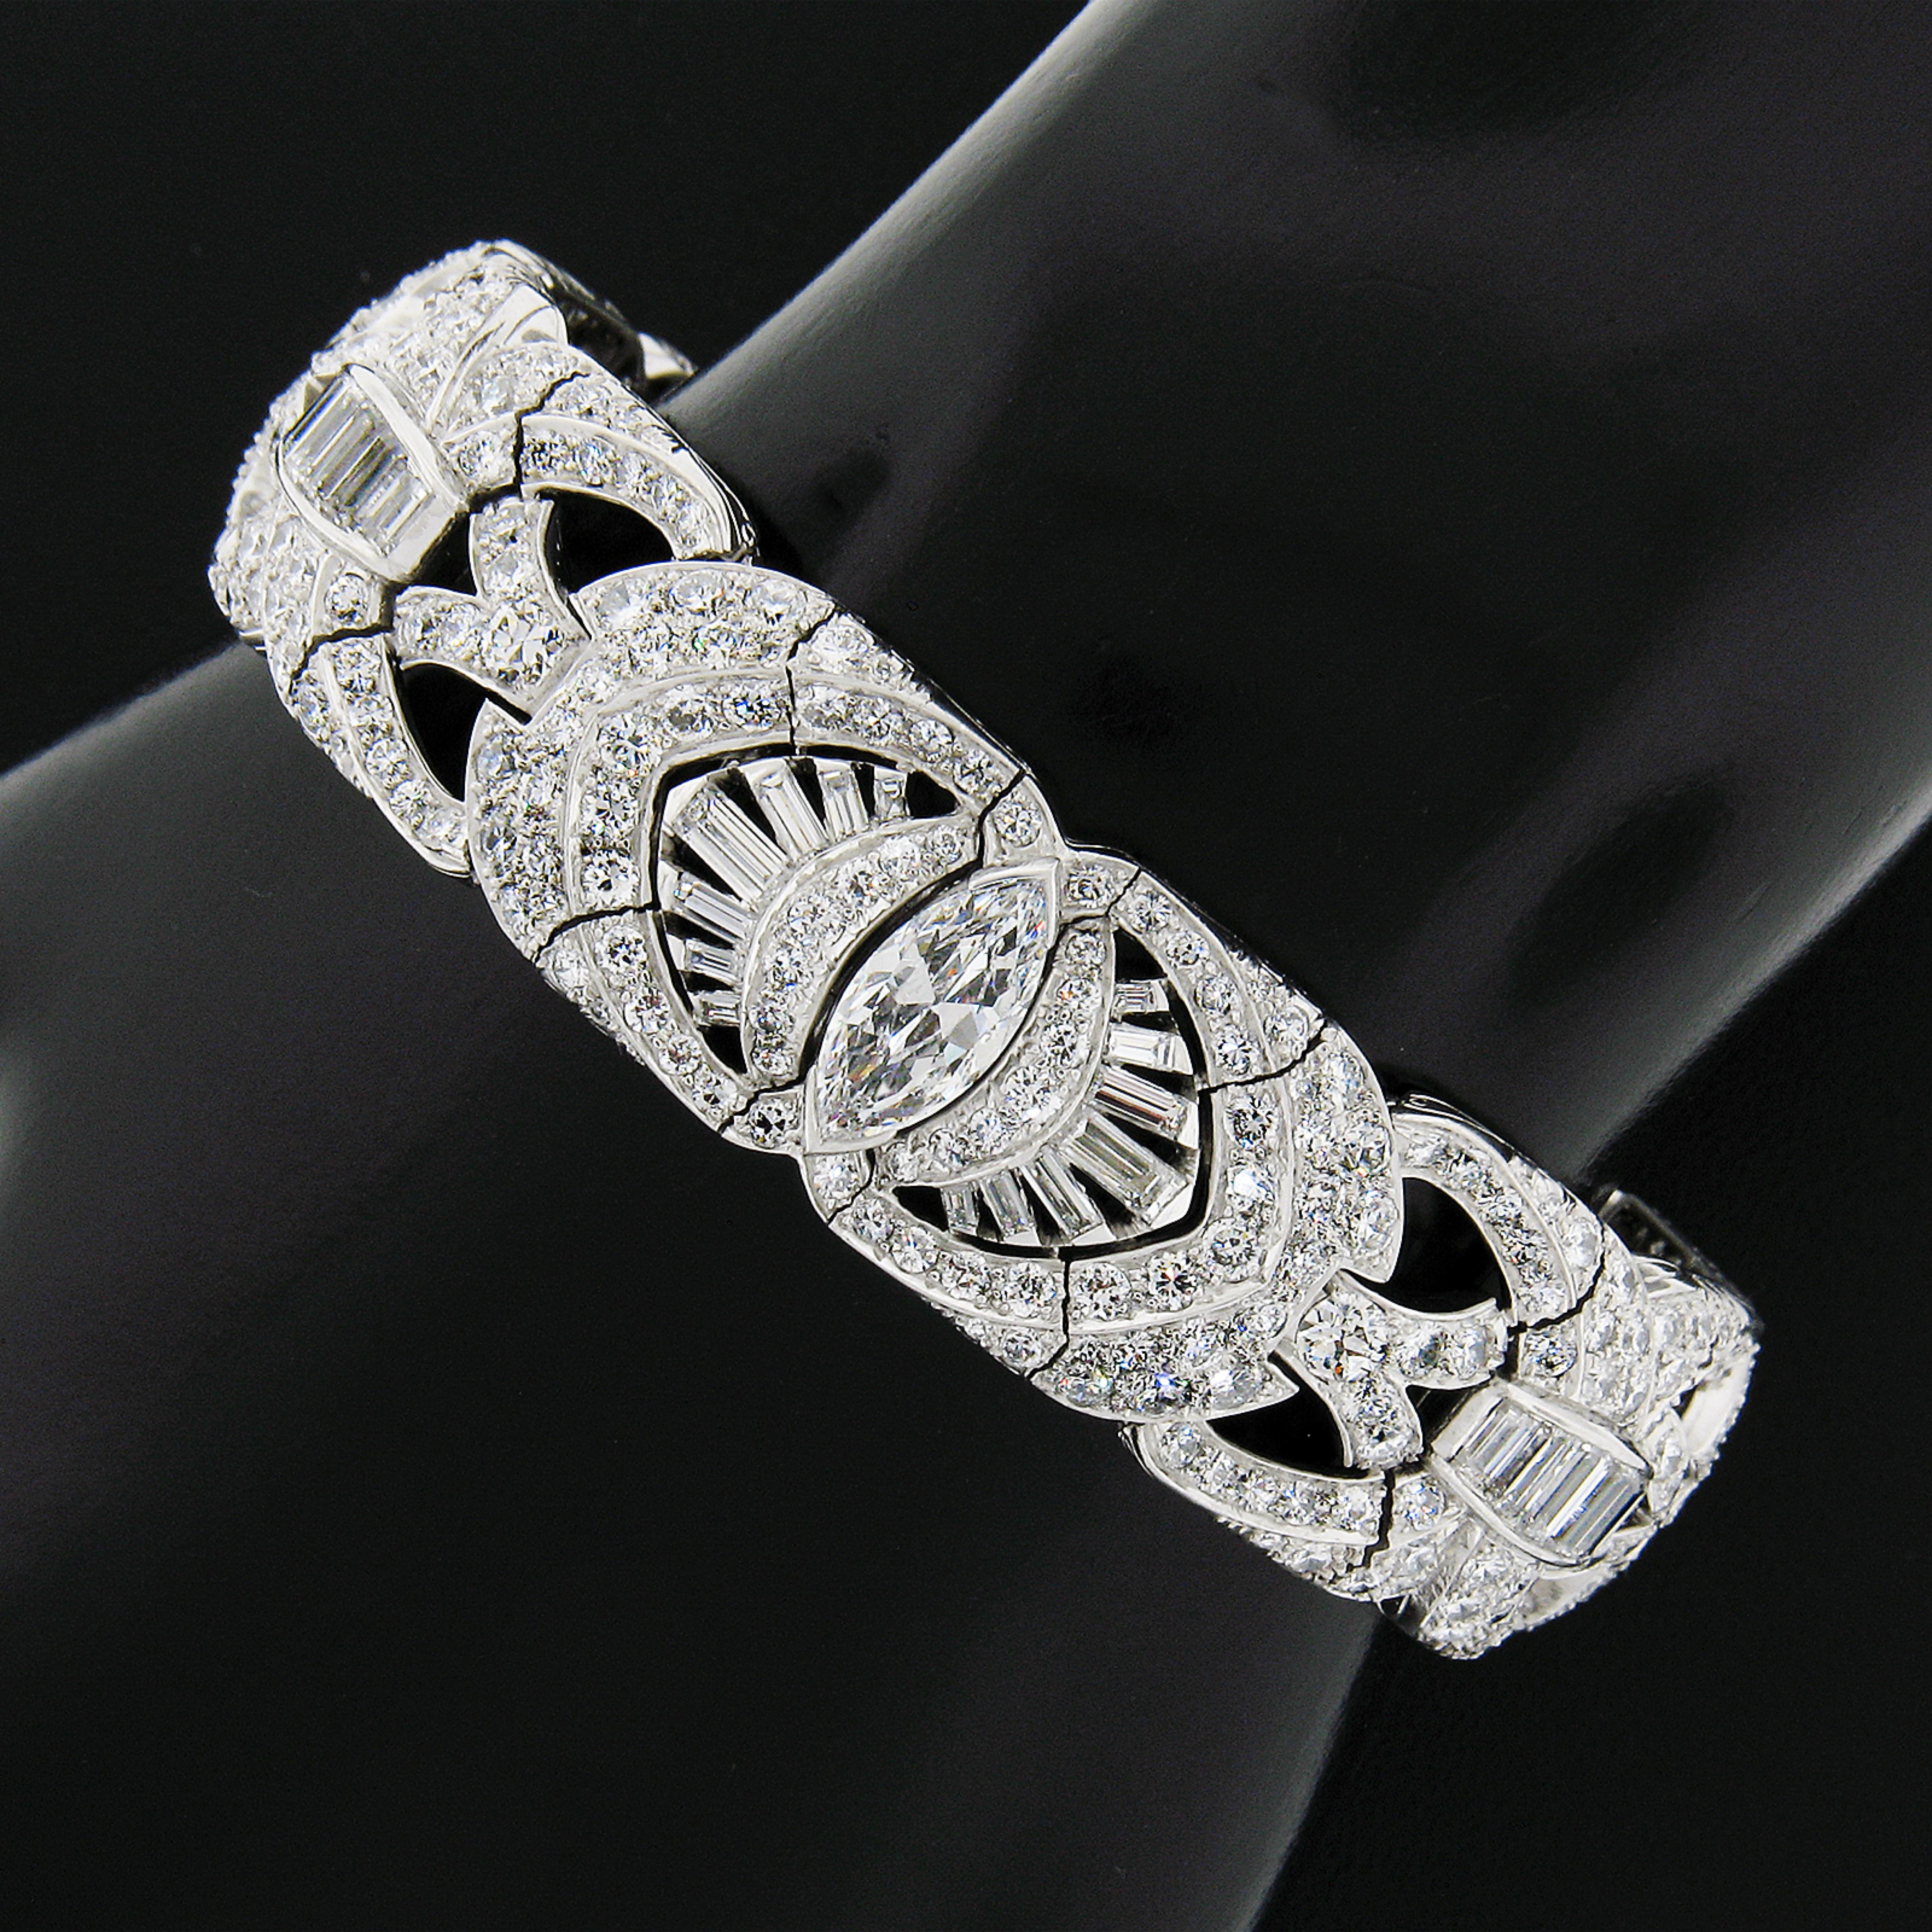 Here we have an absolutely jaw dropping, ALL ORIGINAL, antique art deco period bracelet crafted in solid platinum, and features rectangular links that are fully and elegantly drenched with old cut diamonds throughout. These old cut diamonds are